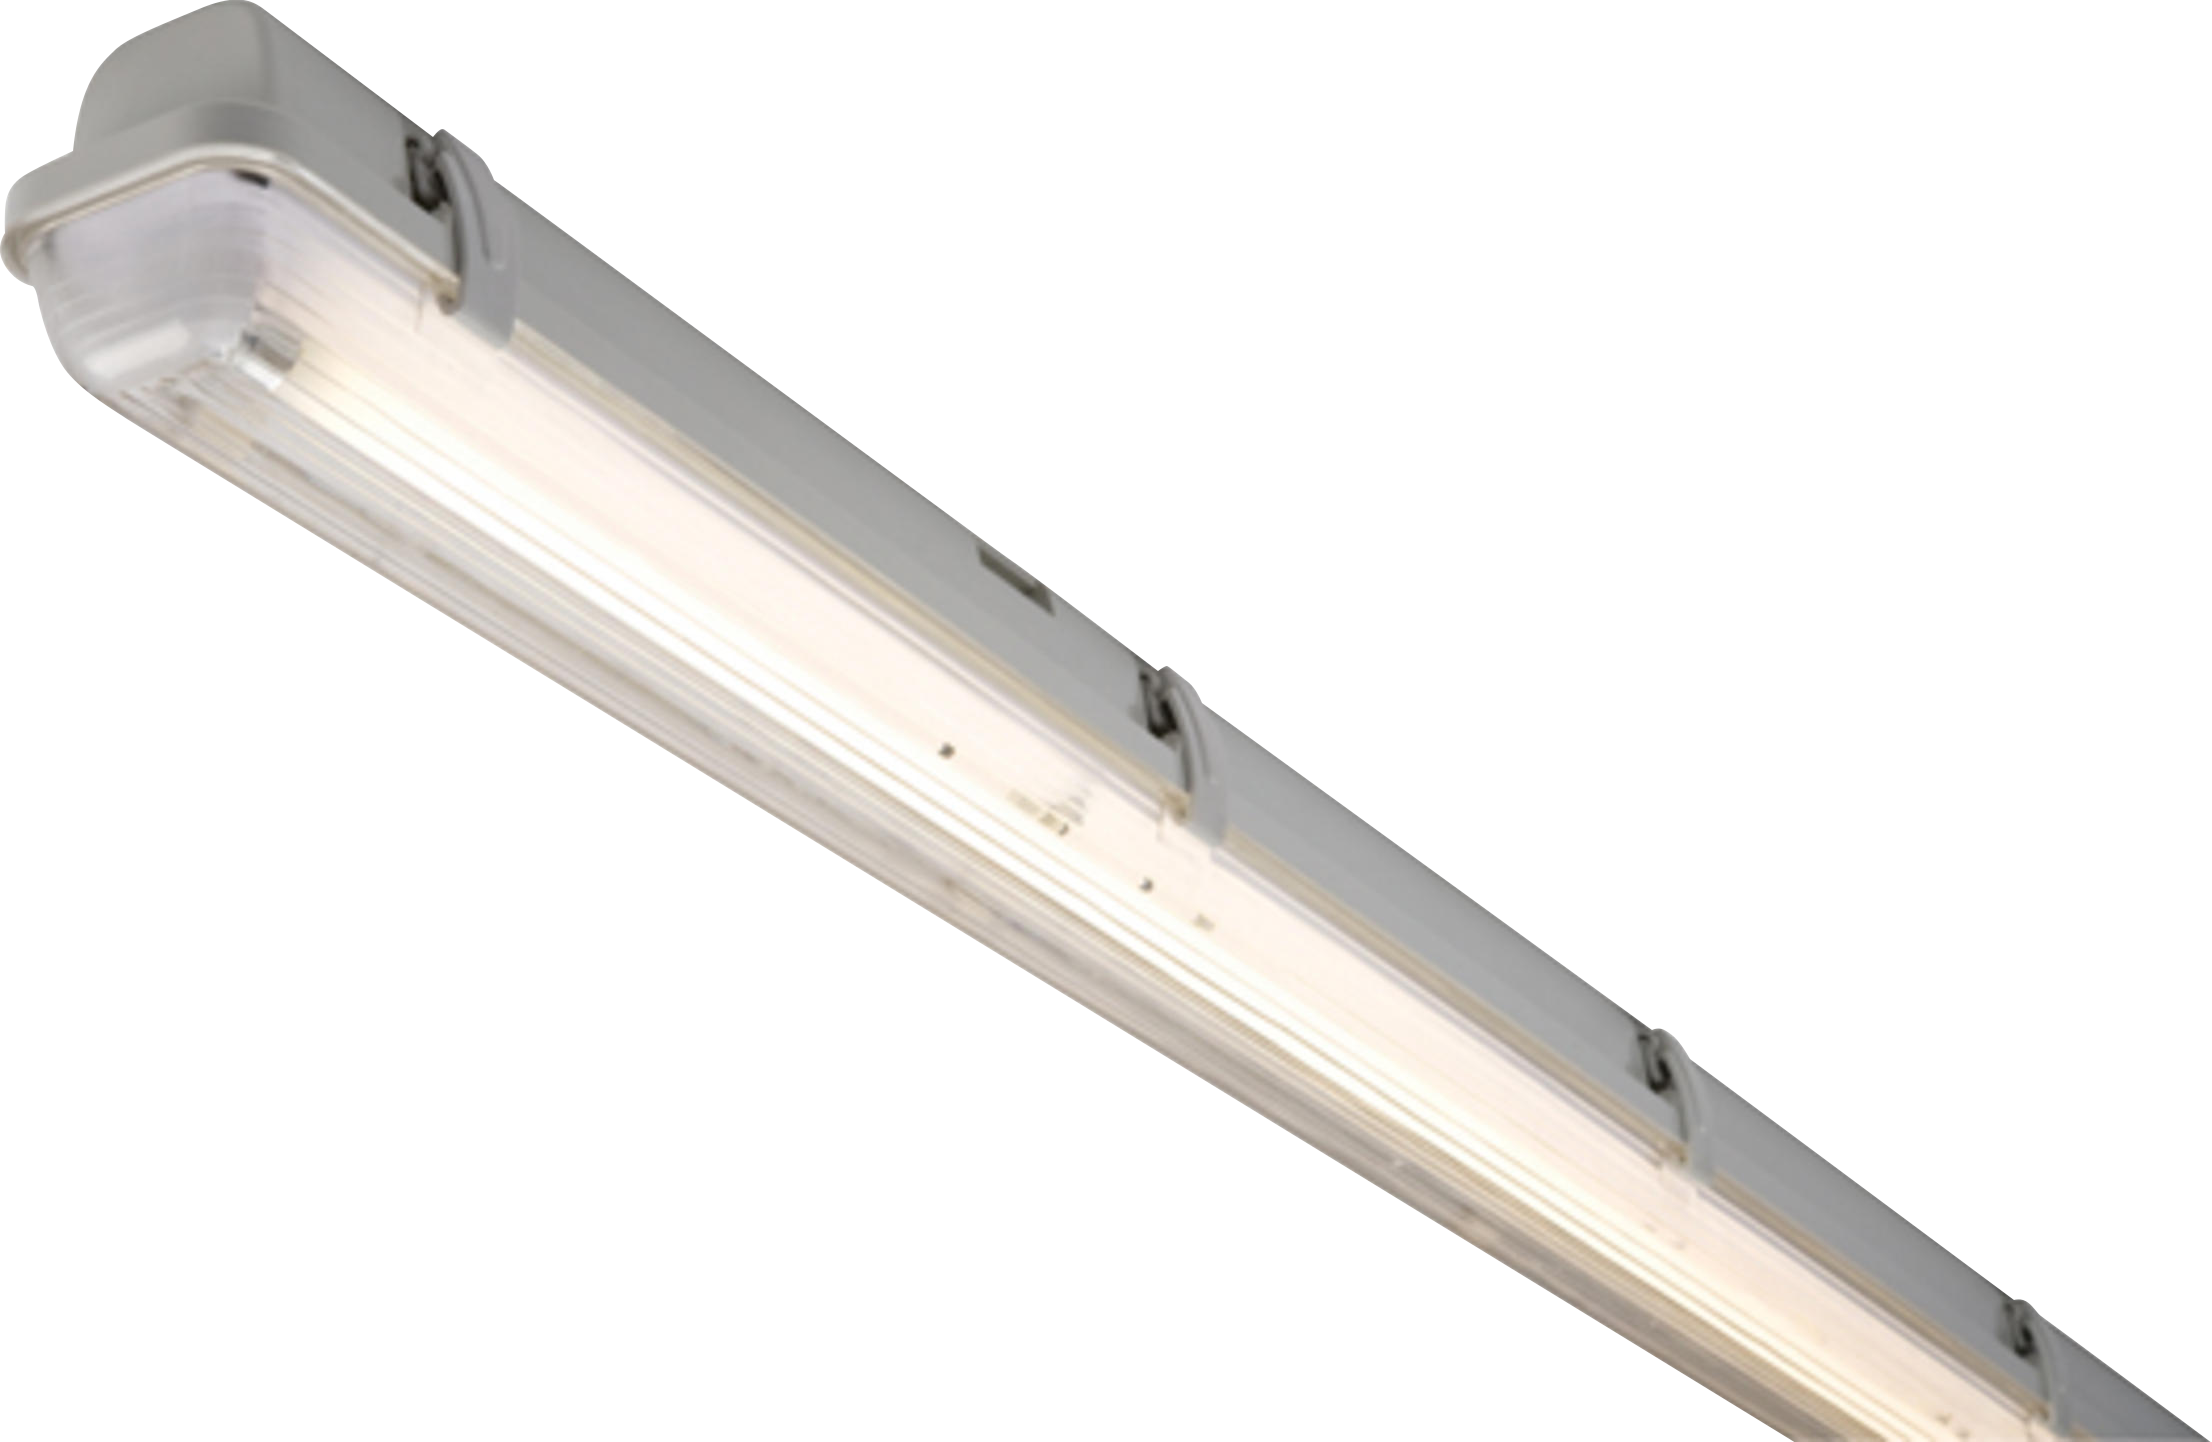 230V IP65 1X35W T5 HF Single Non-Corrosive Fluorescent Emergency Fitting 5ft - NC65135EMHF 